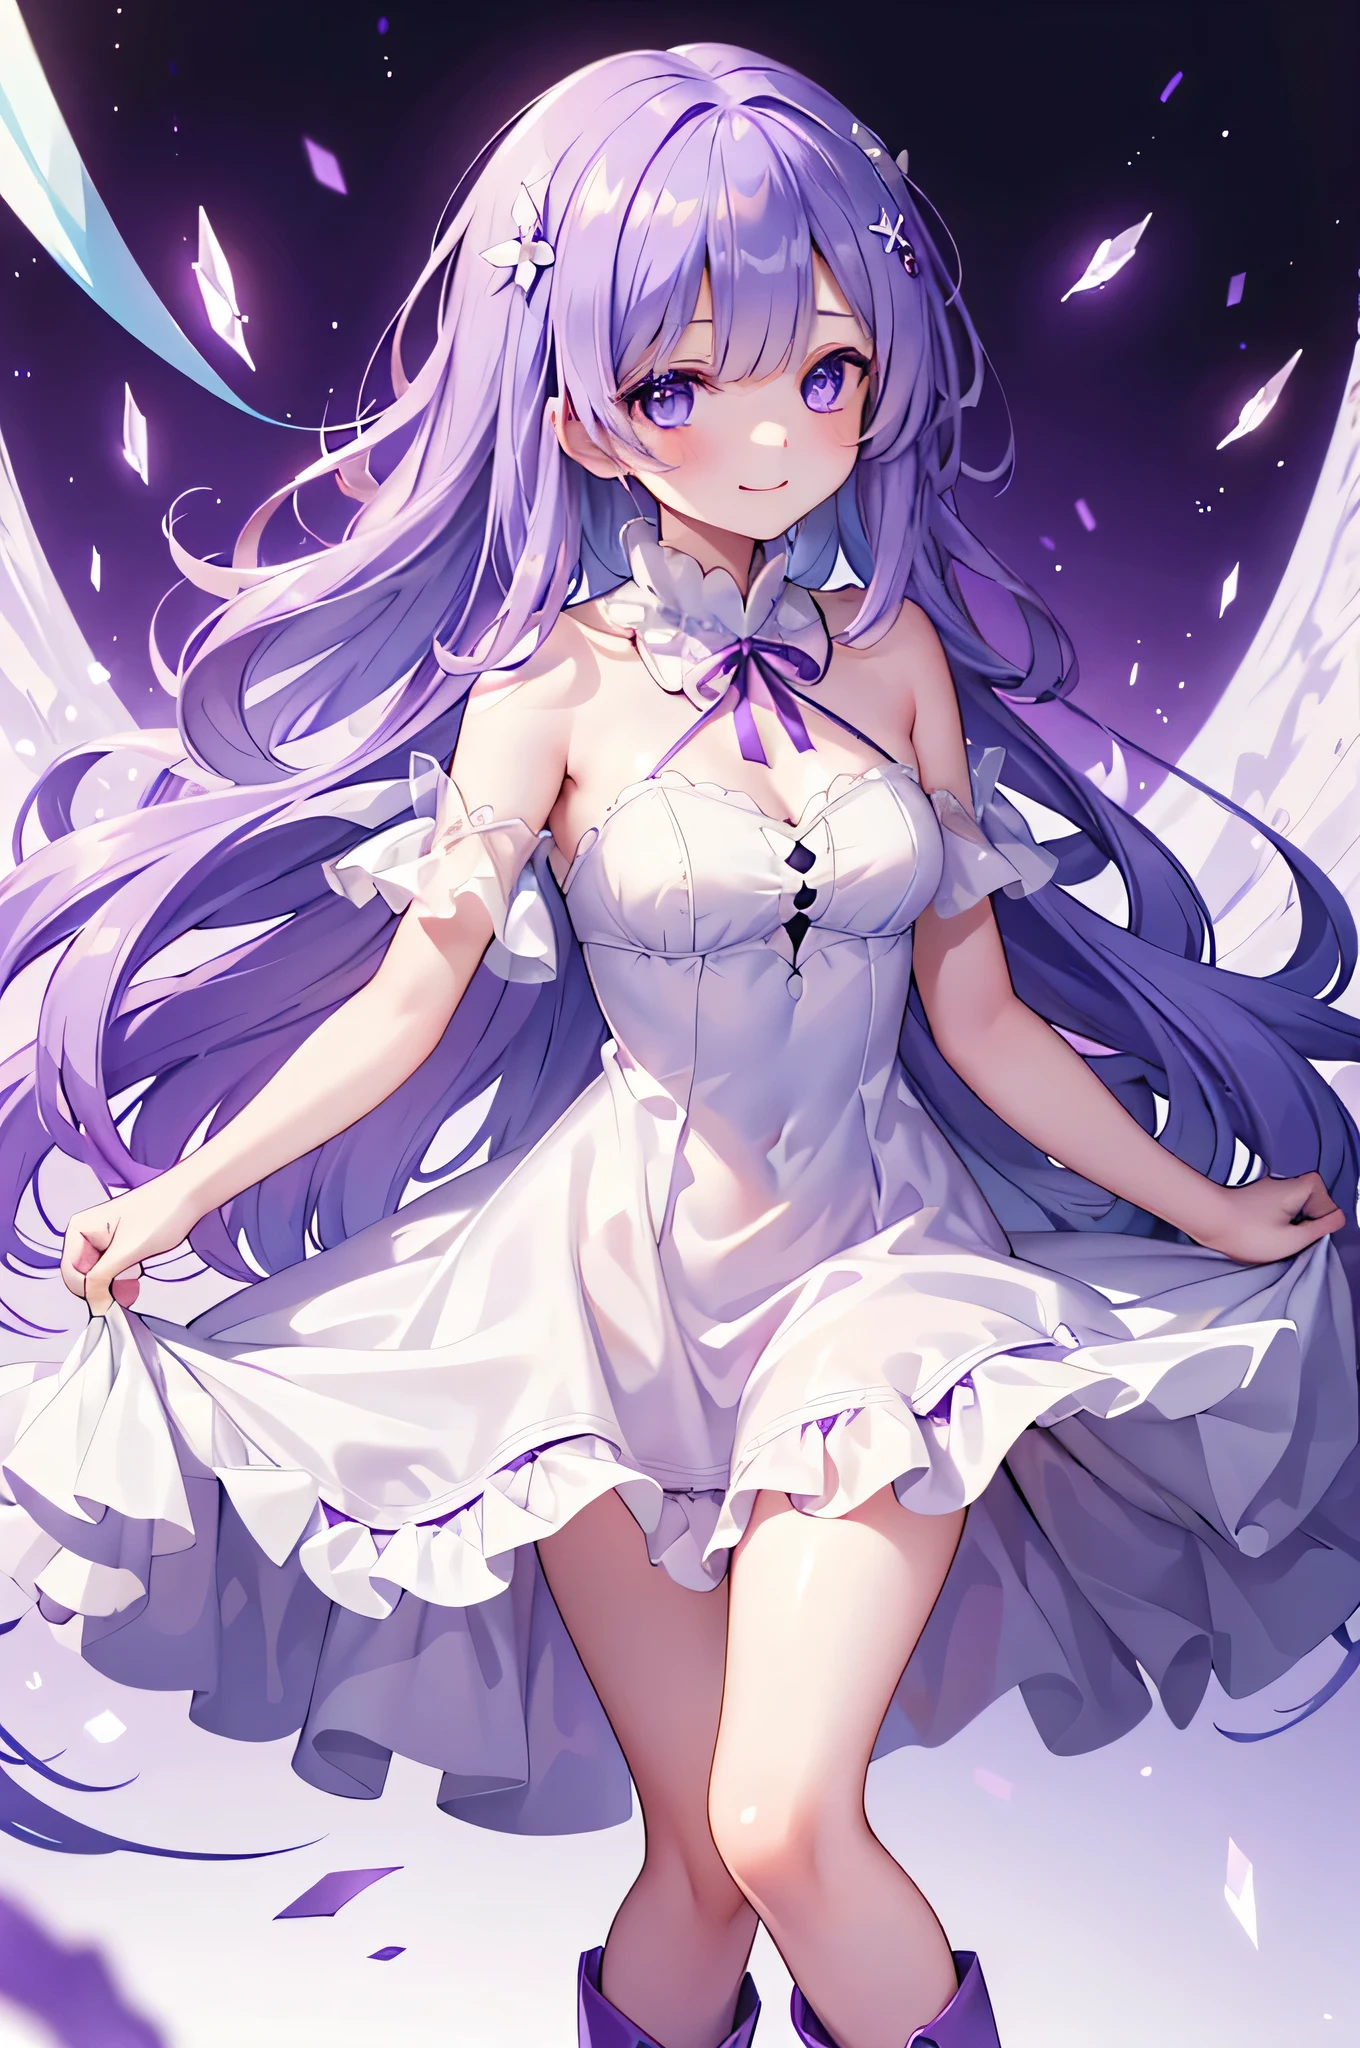 (debris flies, highest quality, ultra high resolution),1 girl,suit , beautiful and detailed face, Fine eye,((purple theme)),((whole body)),Perfect Eye、no background,white background,((wearing purple boots)),((Cute fluffy white dress)),Isshiki、model、beautiful thin legs、slender body,Super model、laughter、smile、Sharp eye,Half eye,eye（1:5）